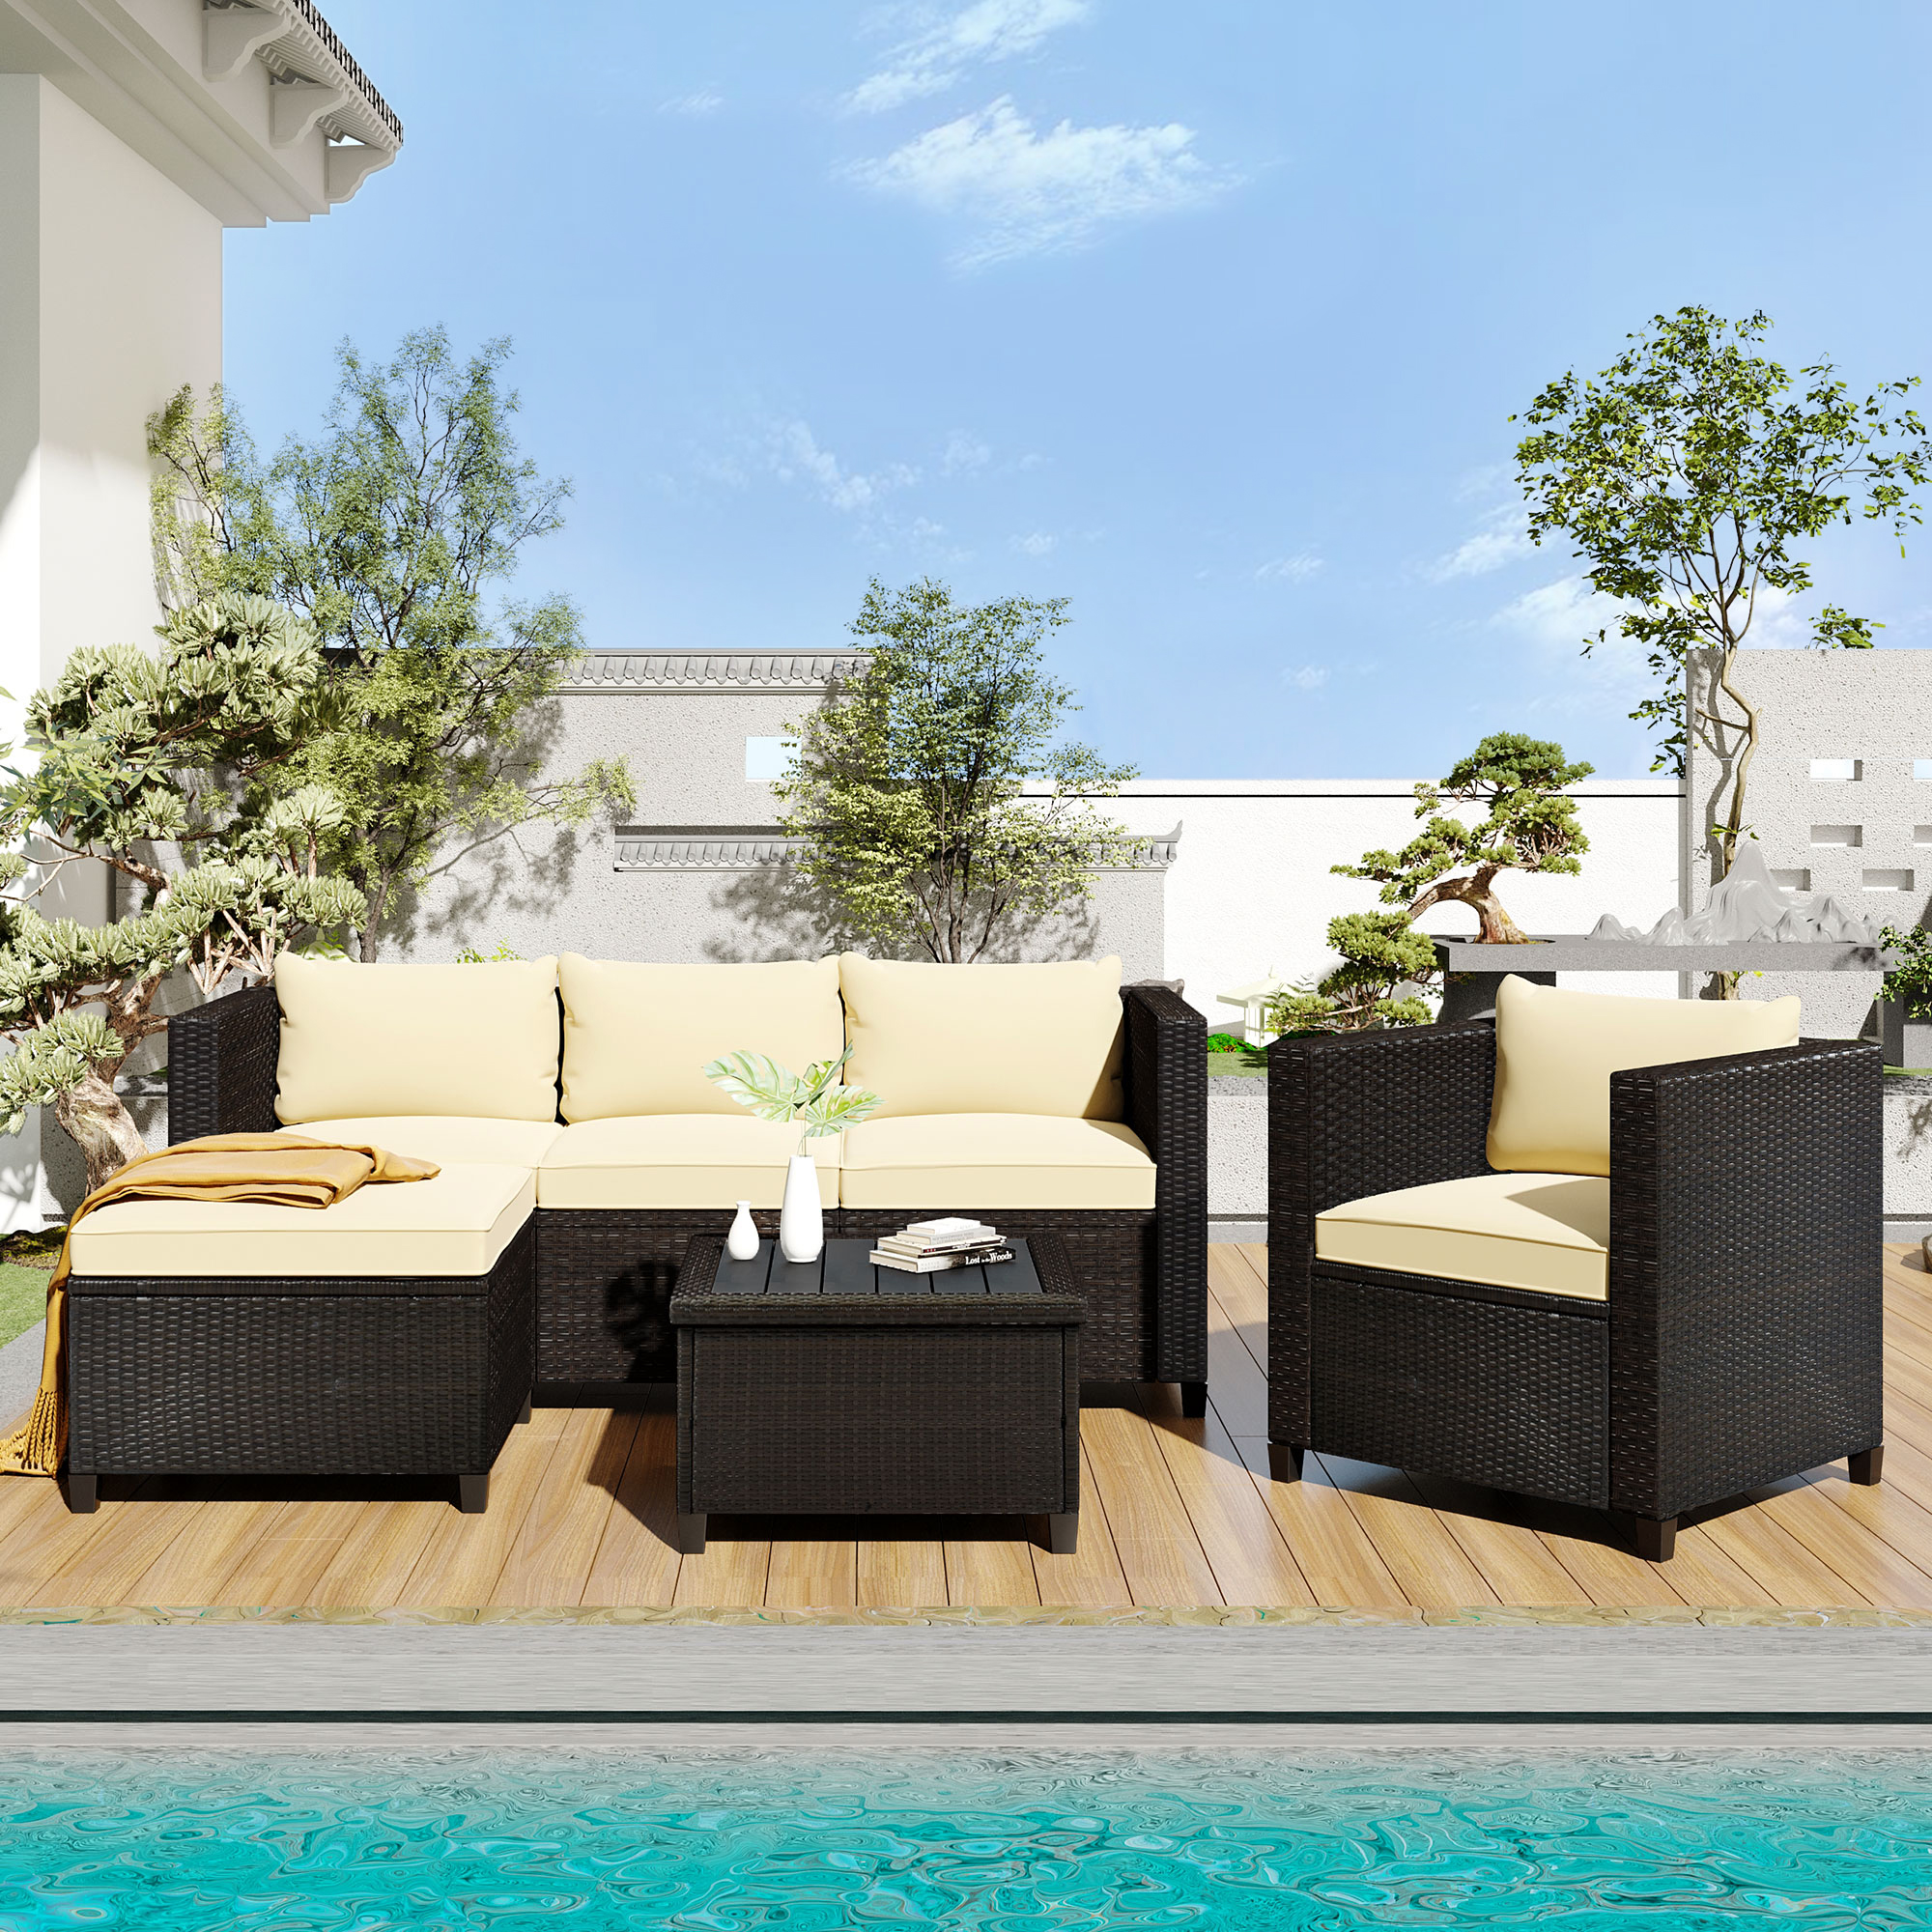 Wicker Sectional Table and Chairs Sets, 5 Pieces Outdoor Wicker Patio Furniture Set with 3-Seat Sofa and Ottoman, Armchair, Rattan Table, Cushions, for Porch Backyard Garden, SS745 - image 2 of 11